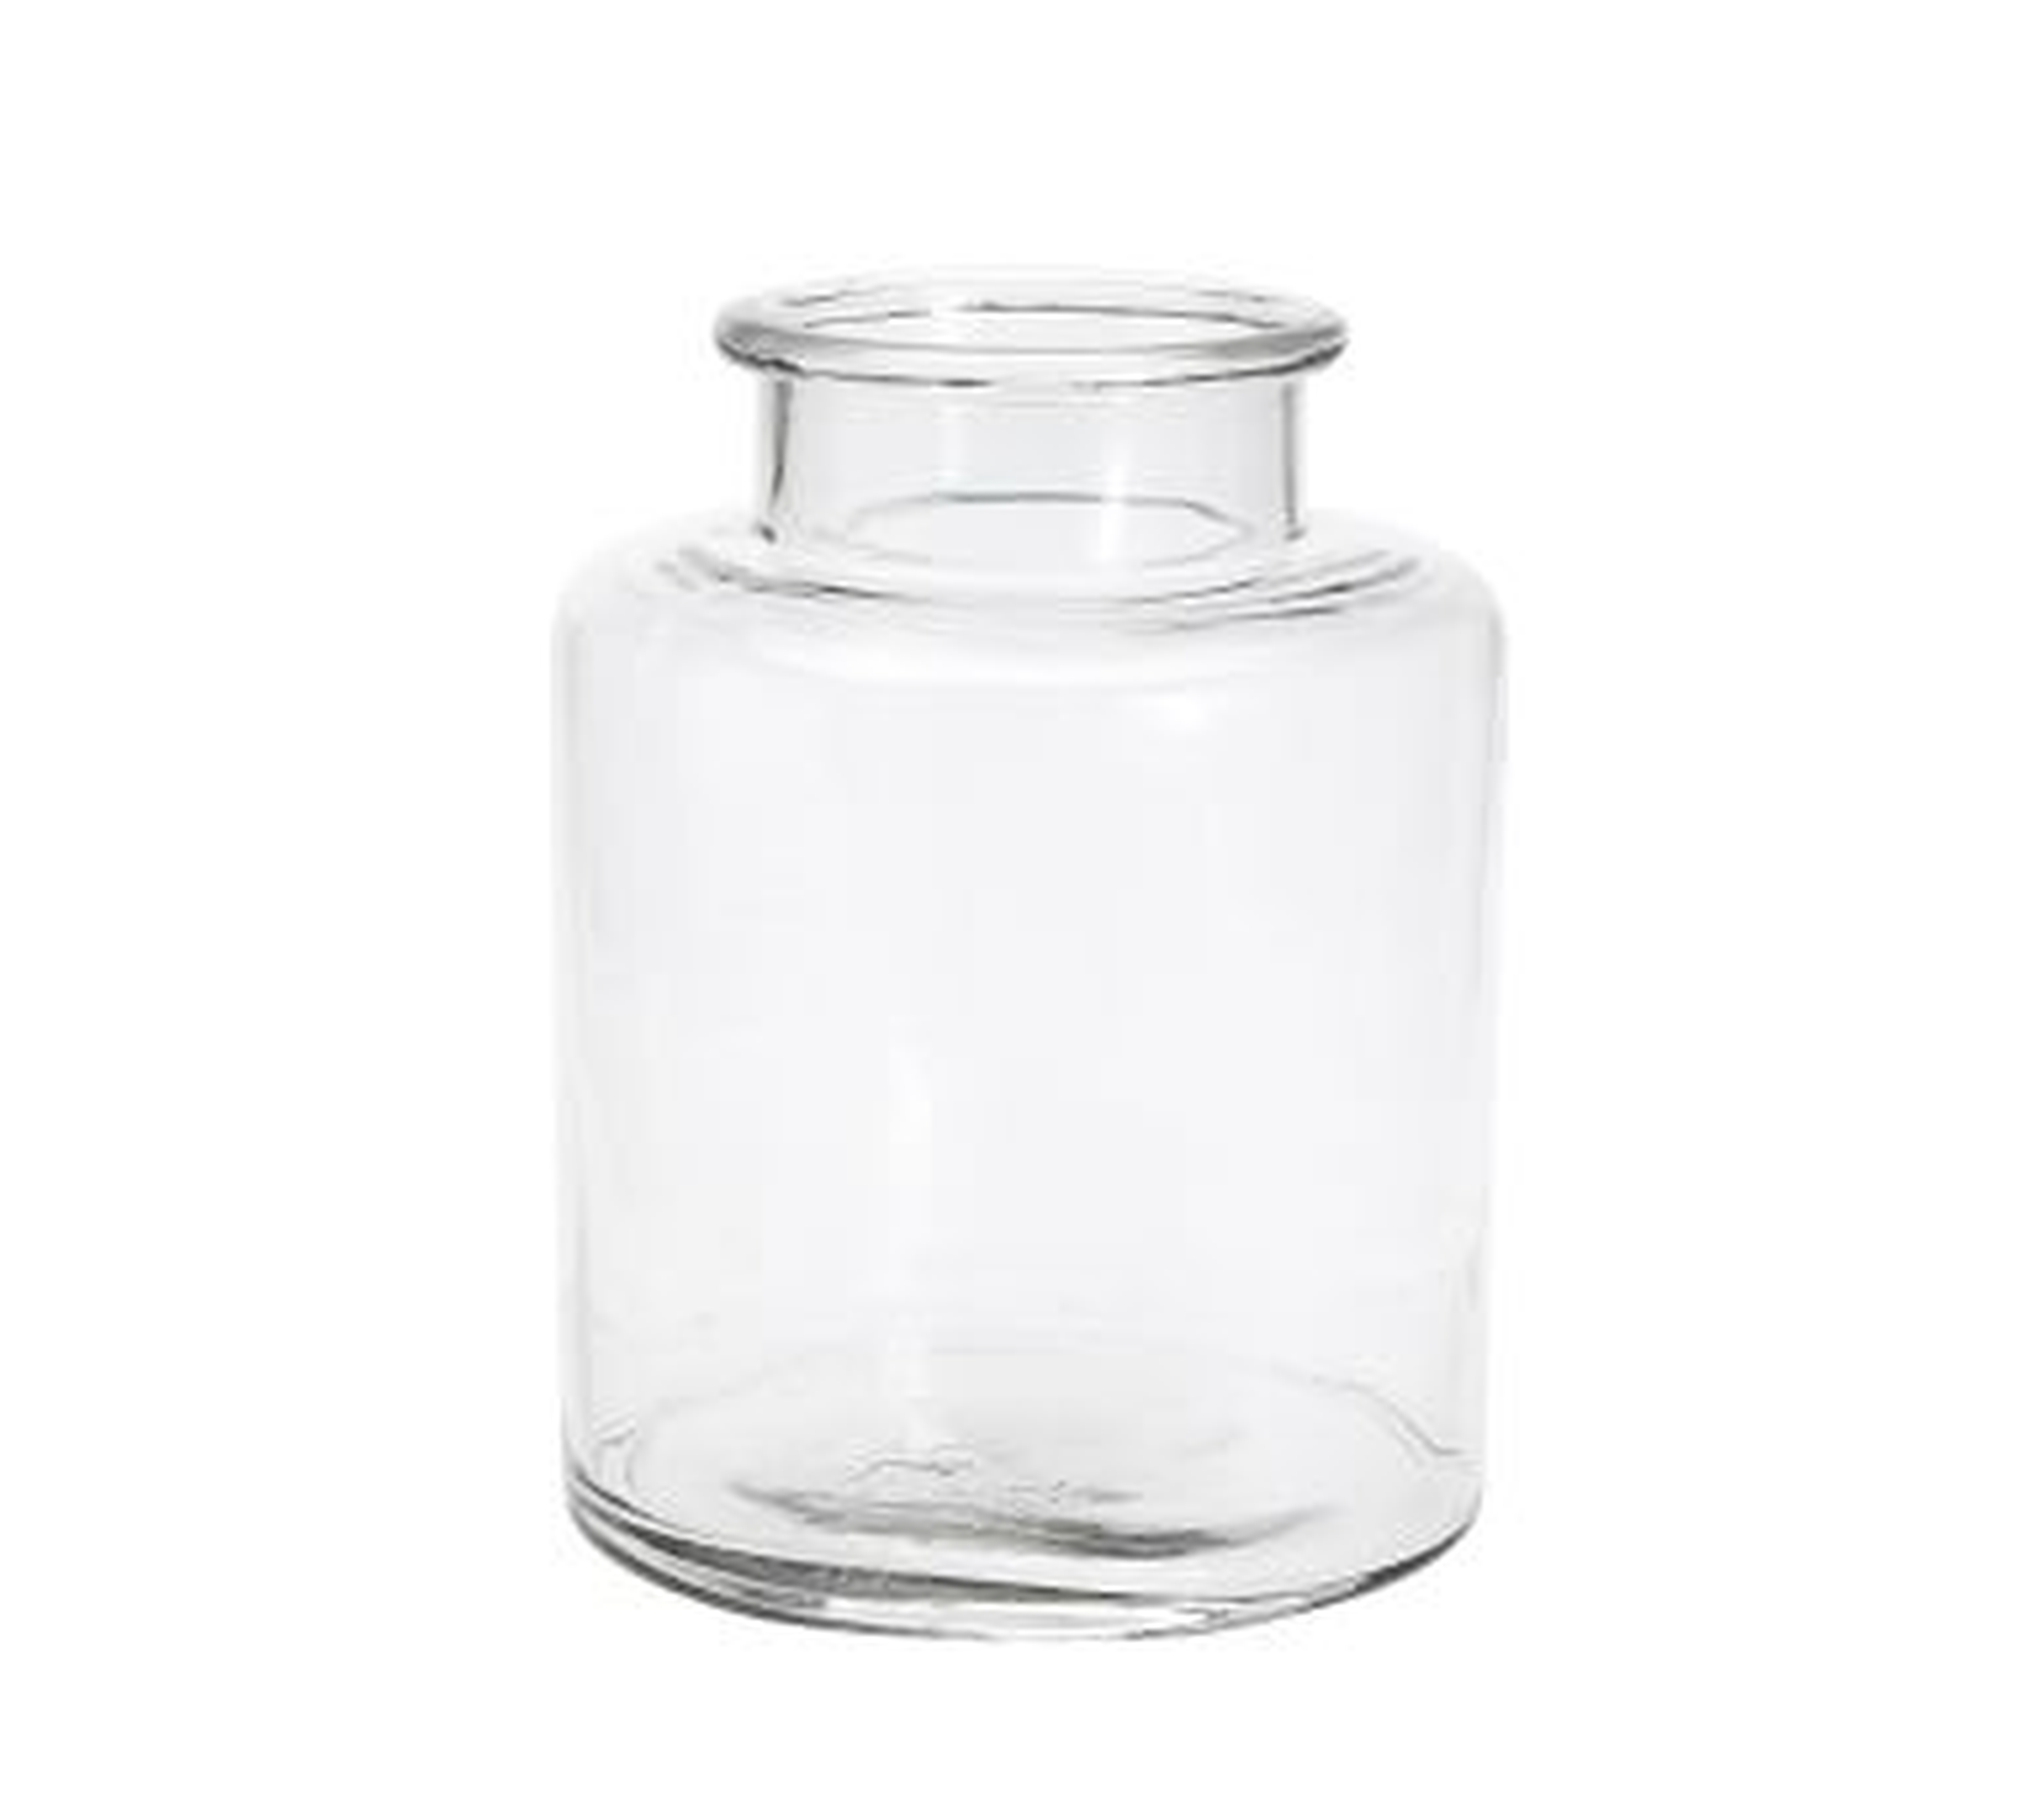 Shouldered Clear Glass Vase, Large - Faux Branch Sold Separately - Pottery Barn